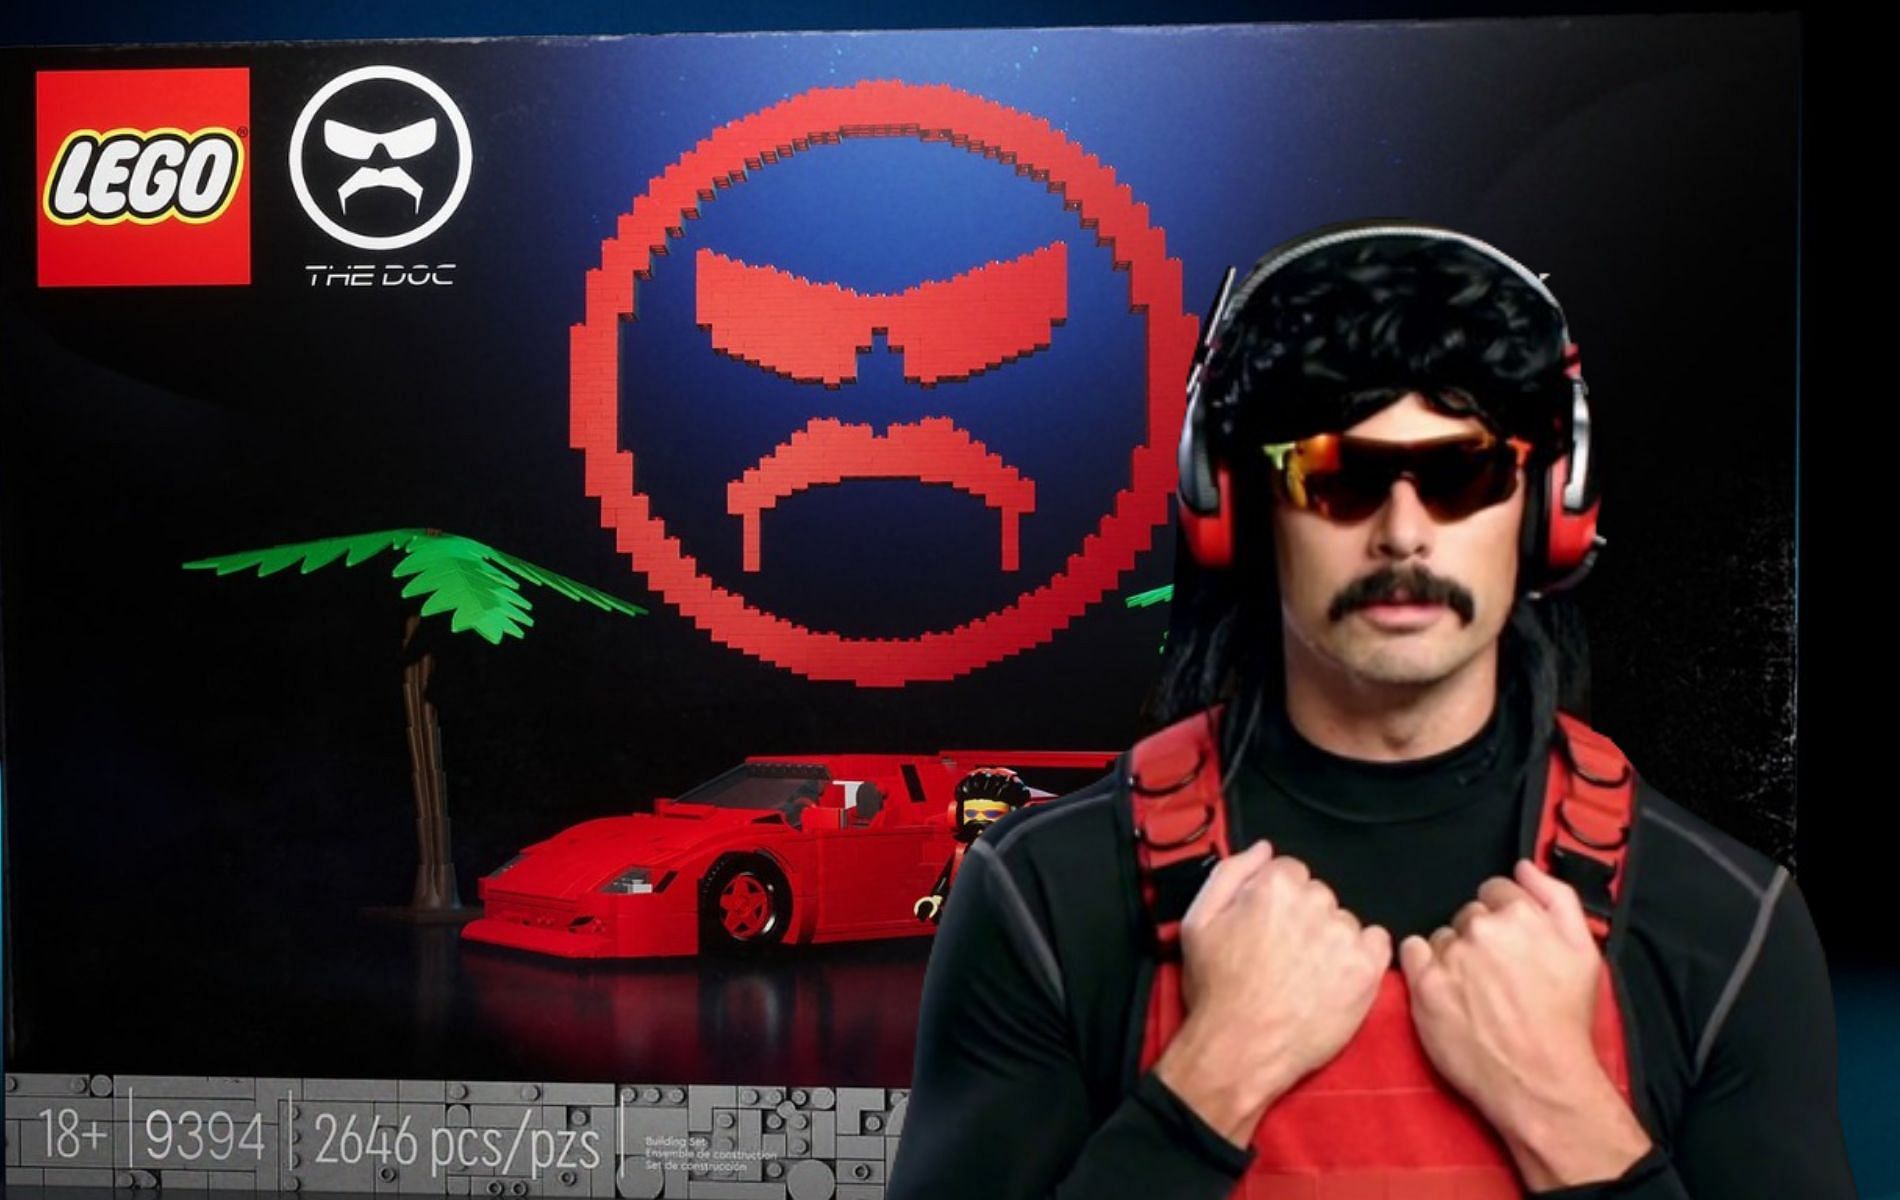 While just a mock-up, fans can&#039;t get enough of a possible Dr DisRespect LEGO set (Image via Sportskeeda)